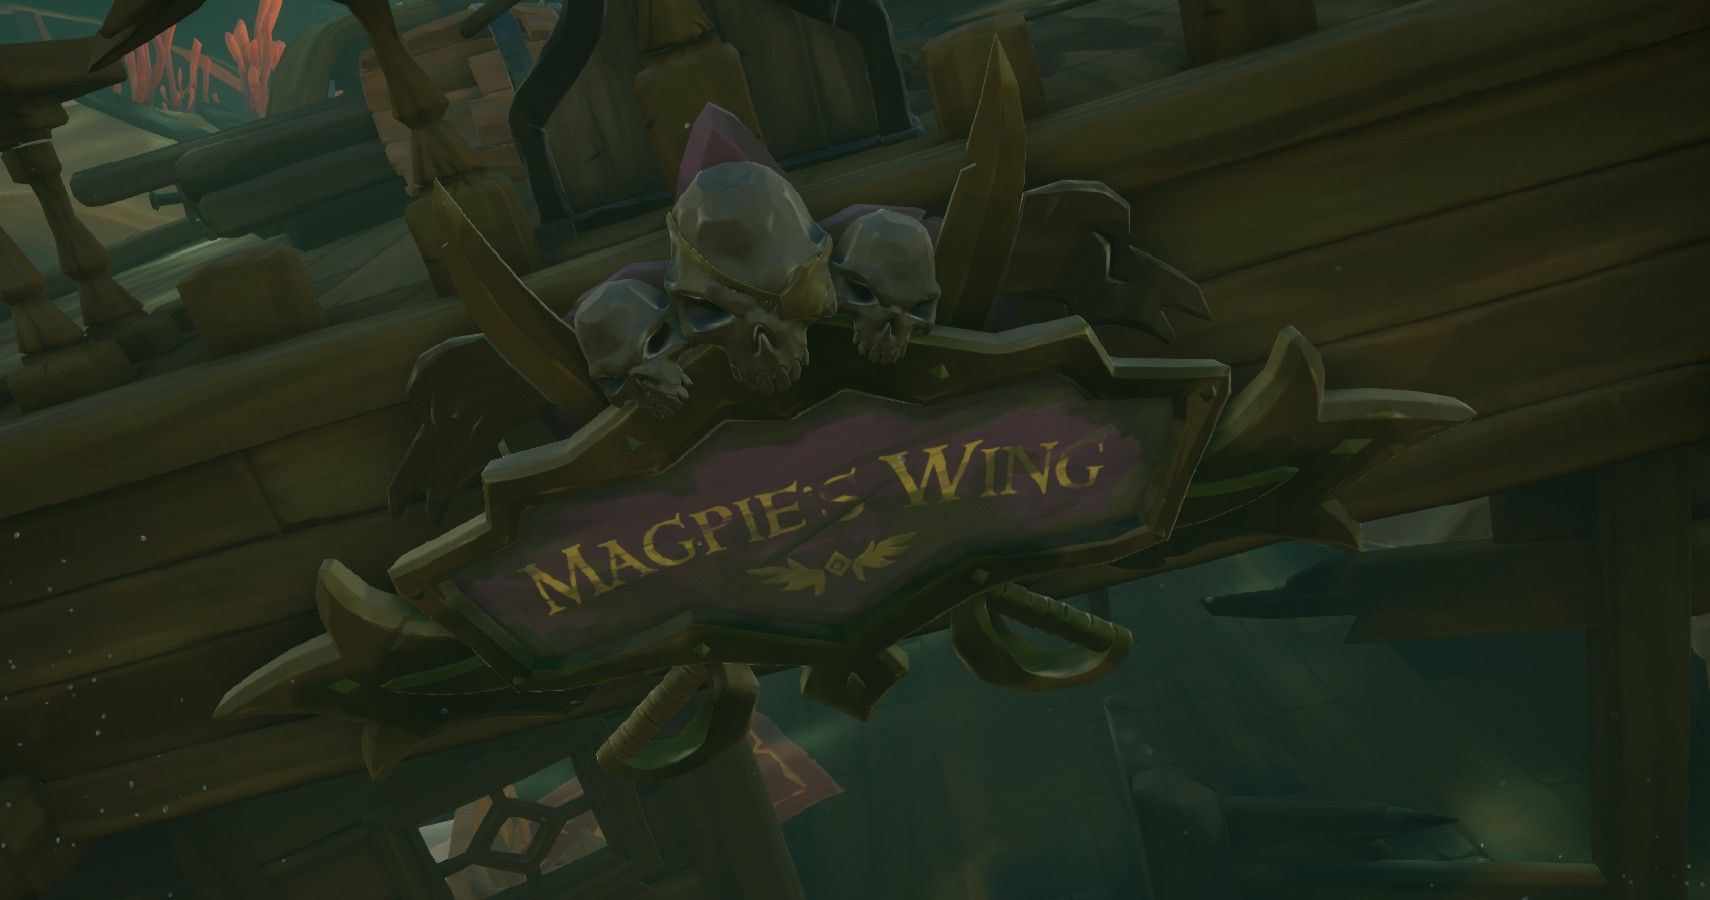 The Magpie's Wing in Sea of Thieves